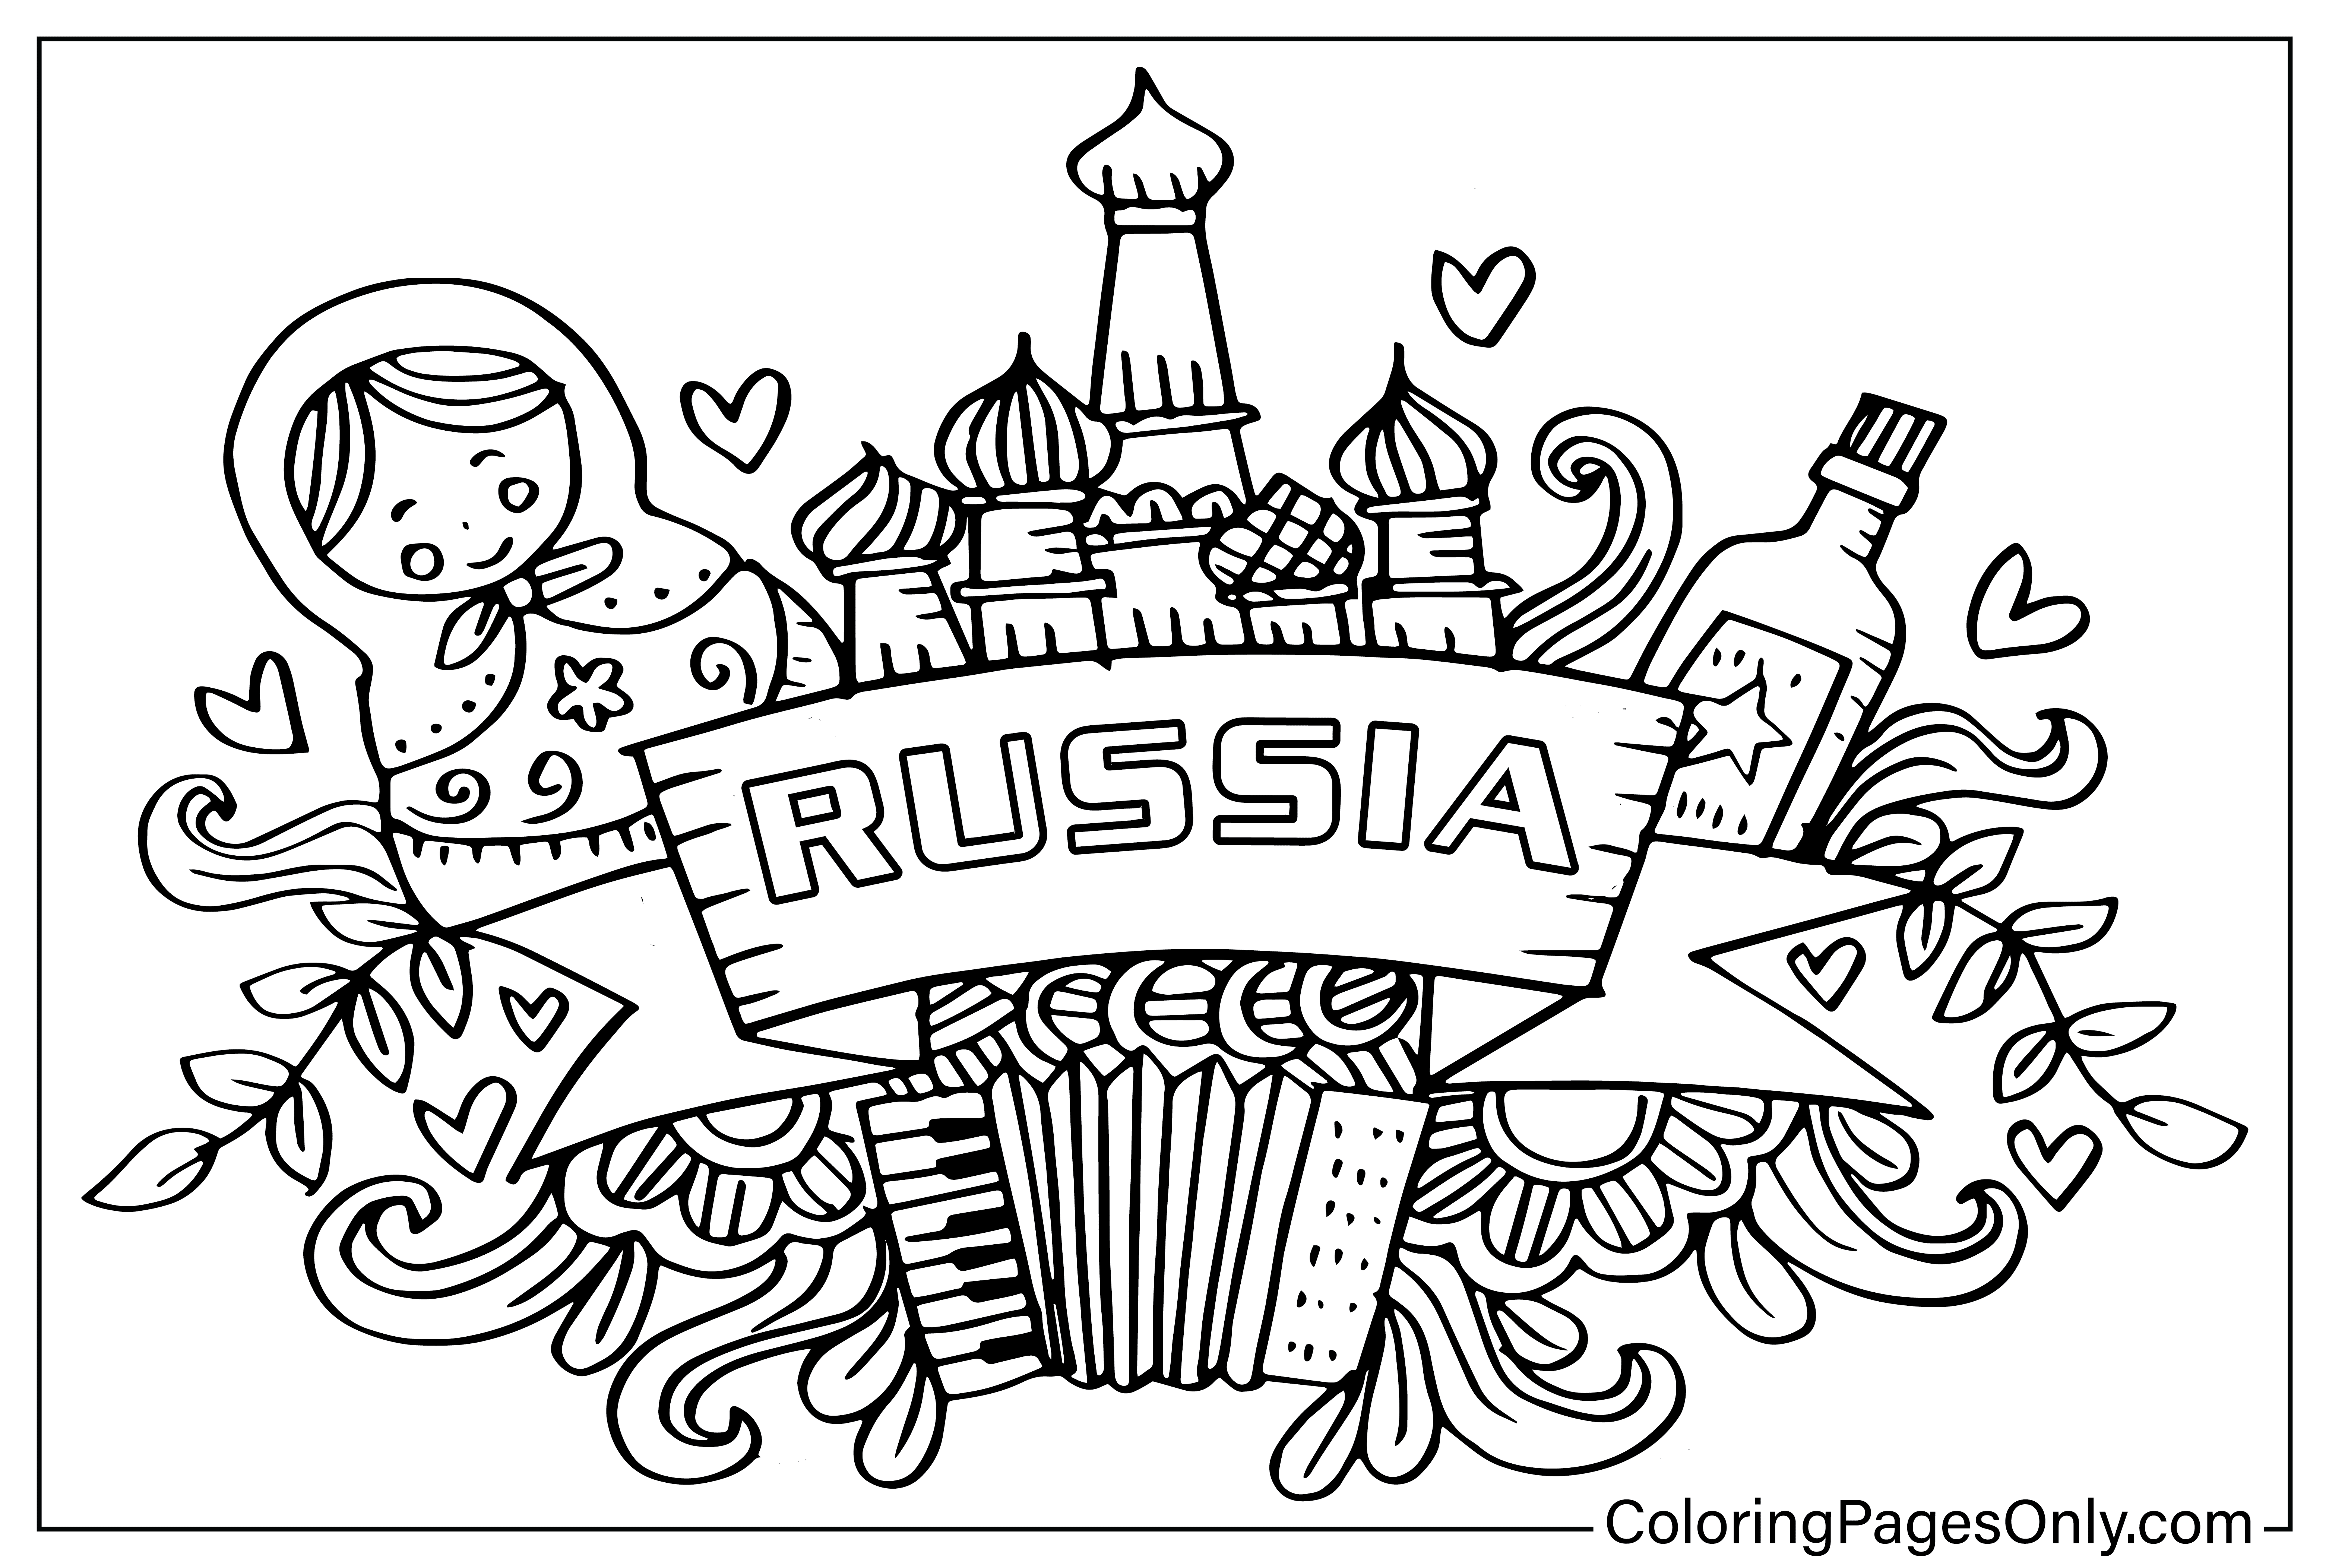 Coloring Page Russia from Russia